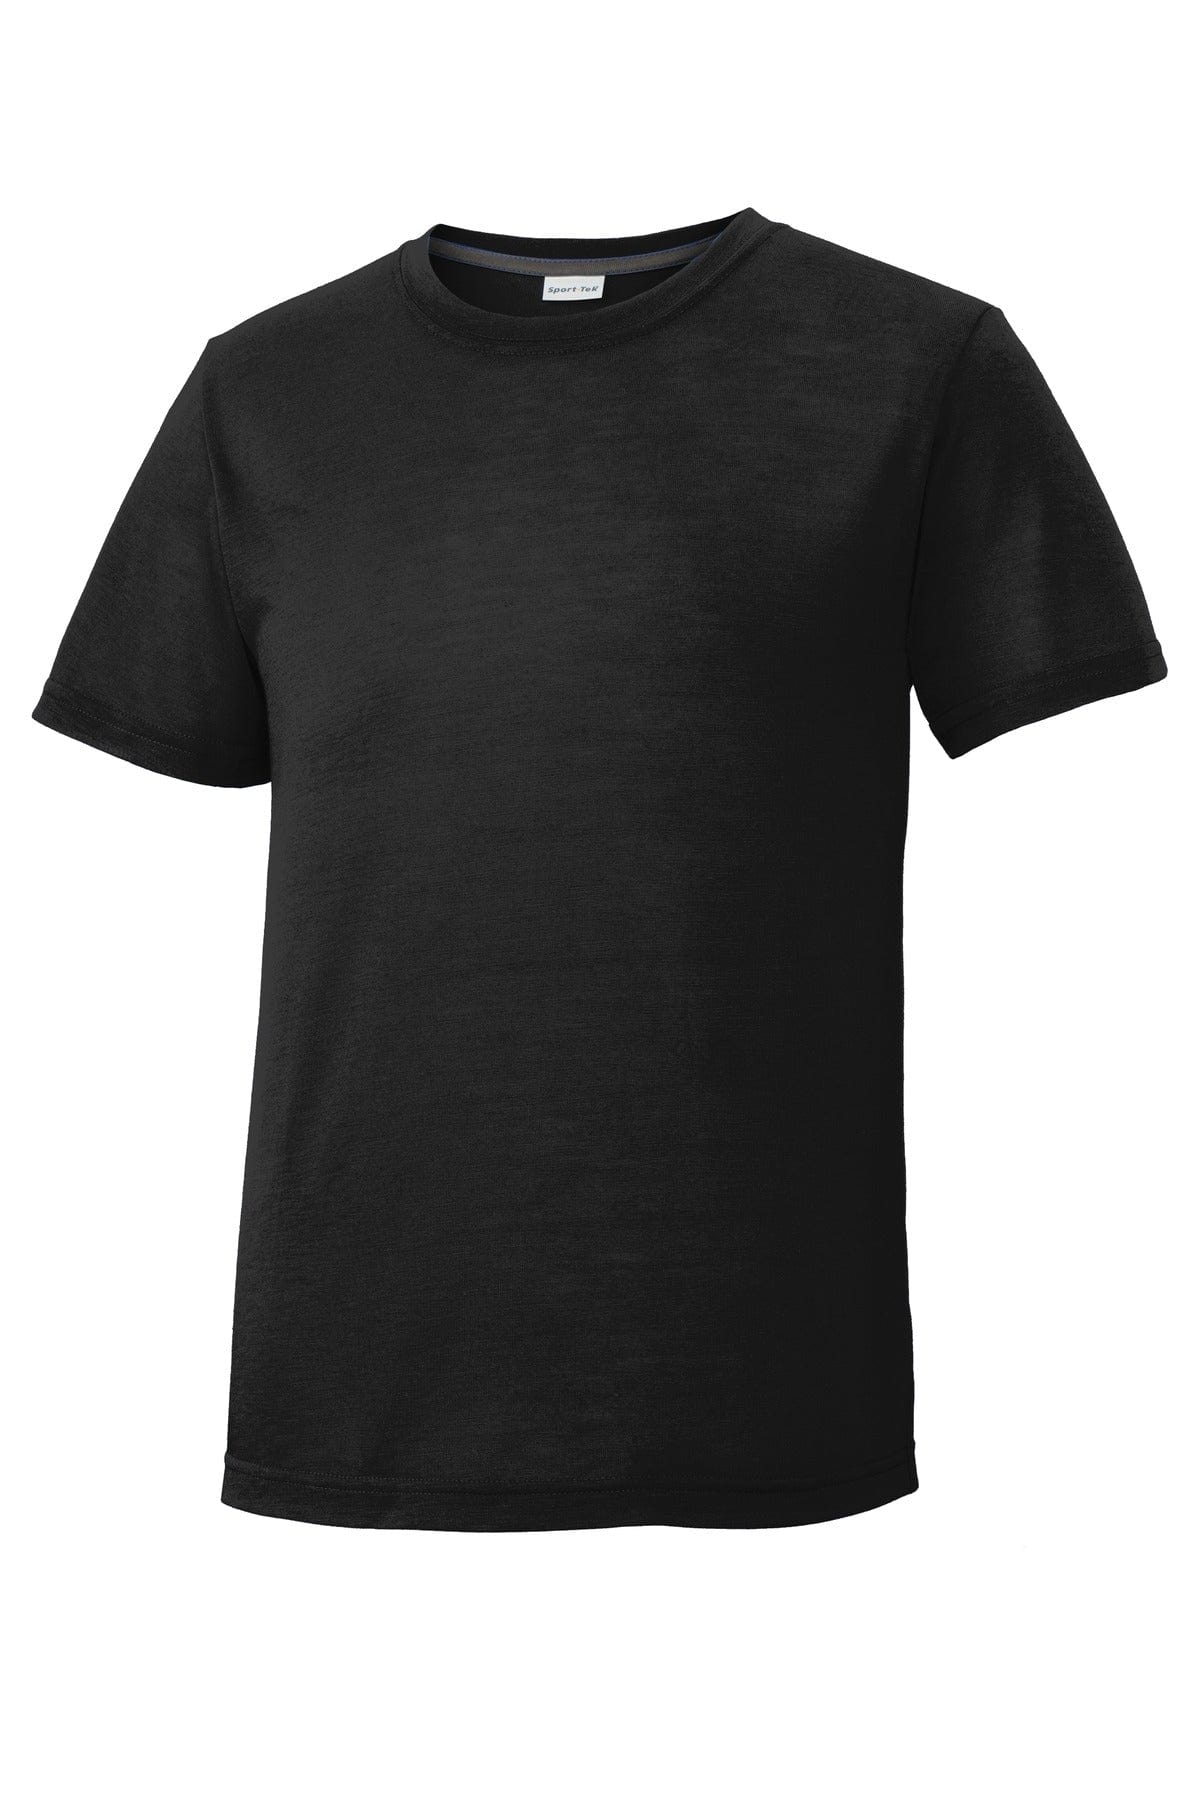 Sport-Tek ® Youth PosiCharge ® Competitor ™ Cotton Touch ™ Tee. YST450